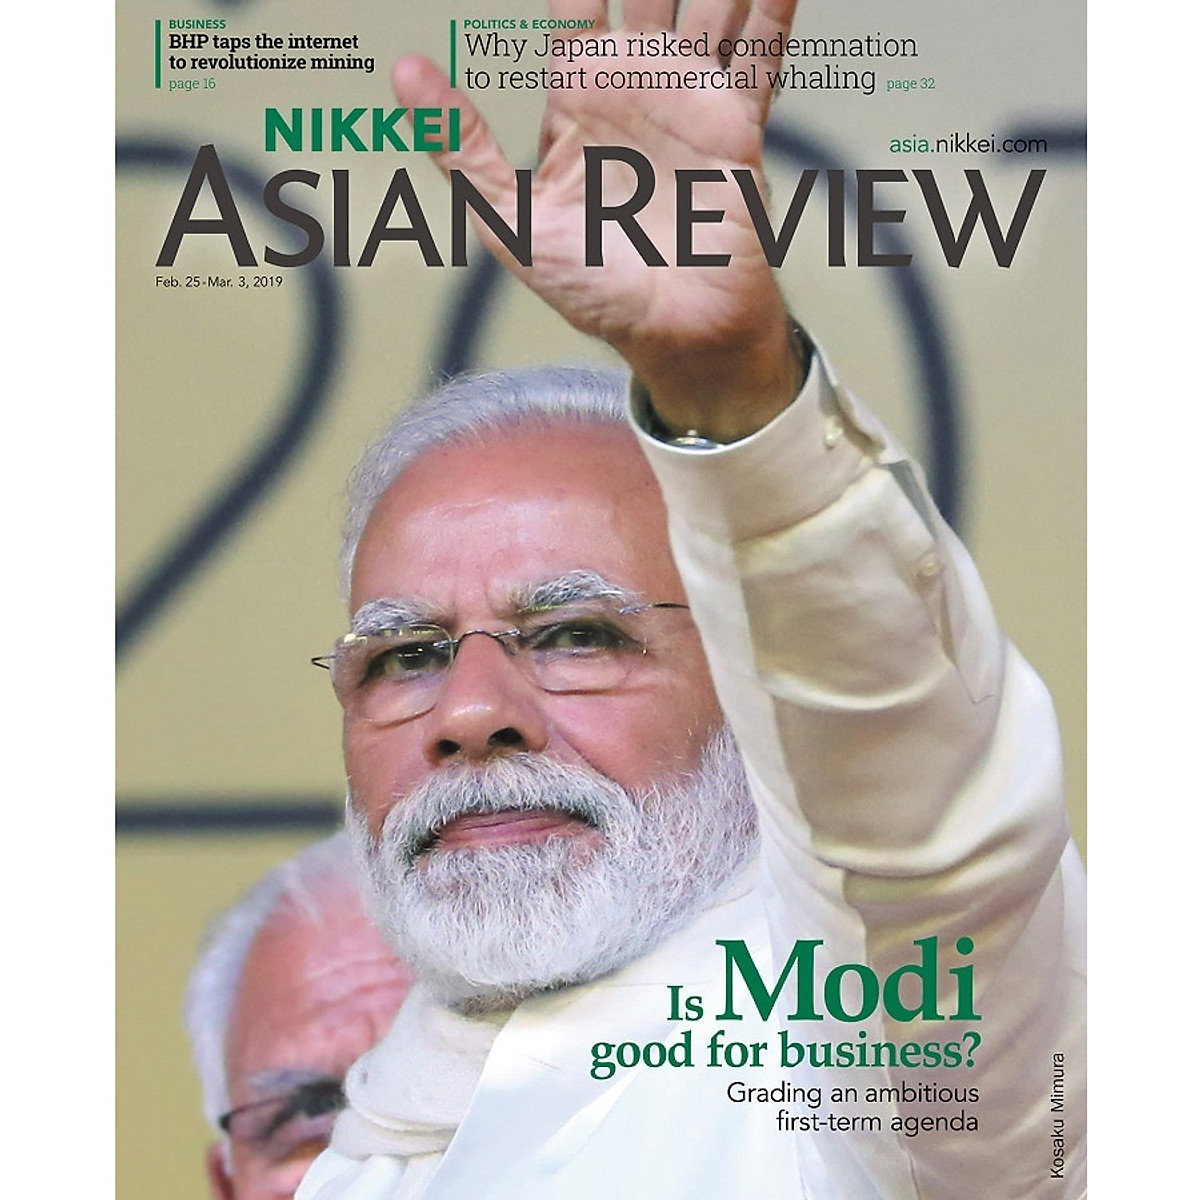 Nikkei Asian Review: Is Modi Good for Business - 08.19